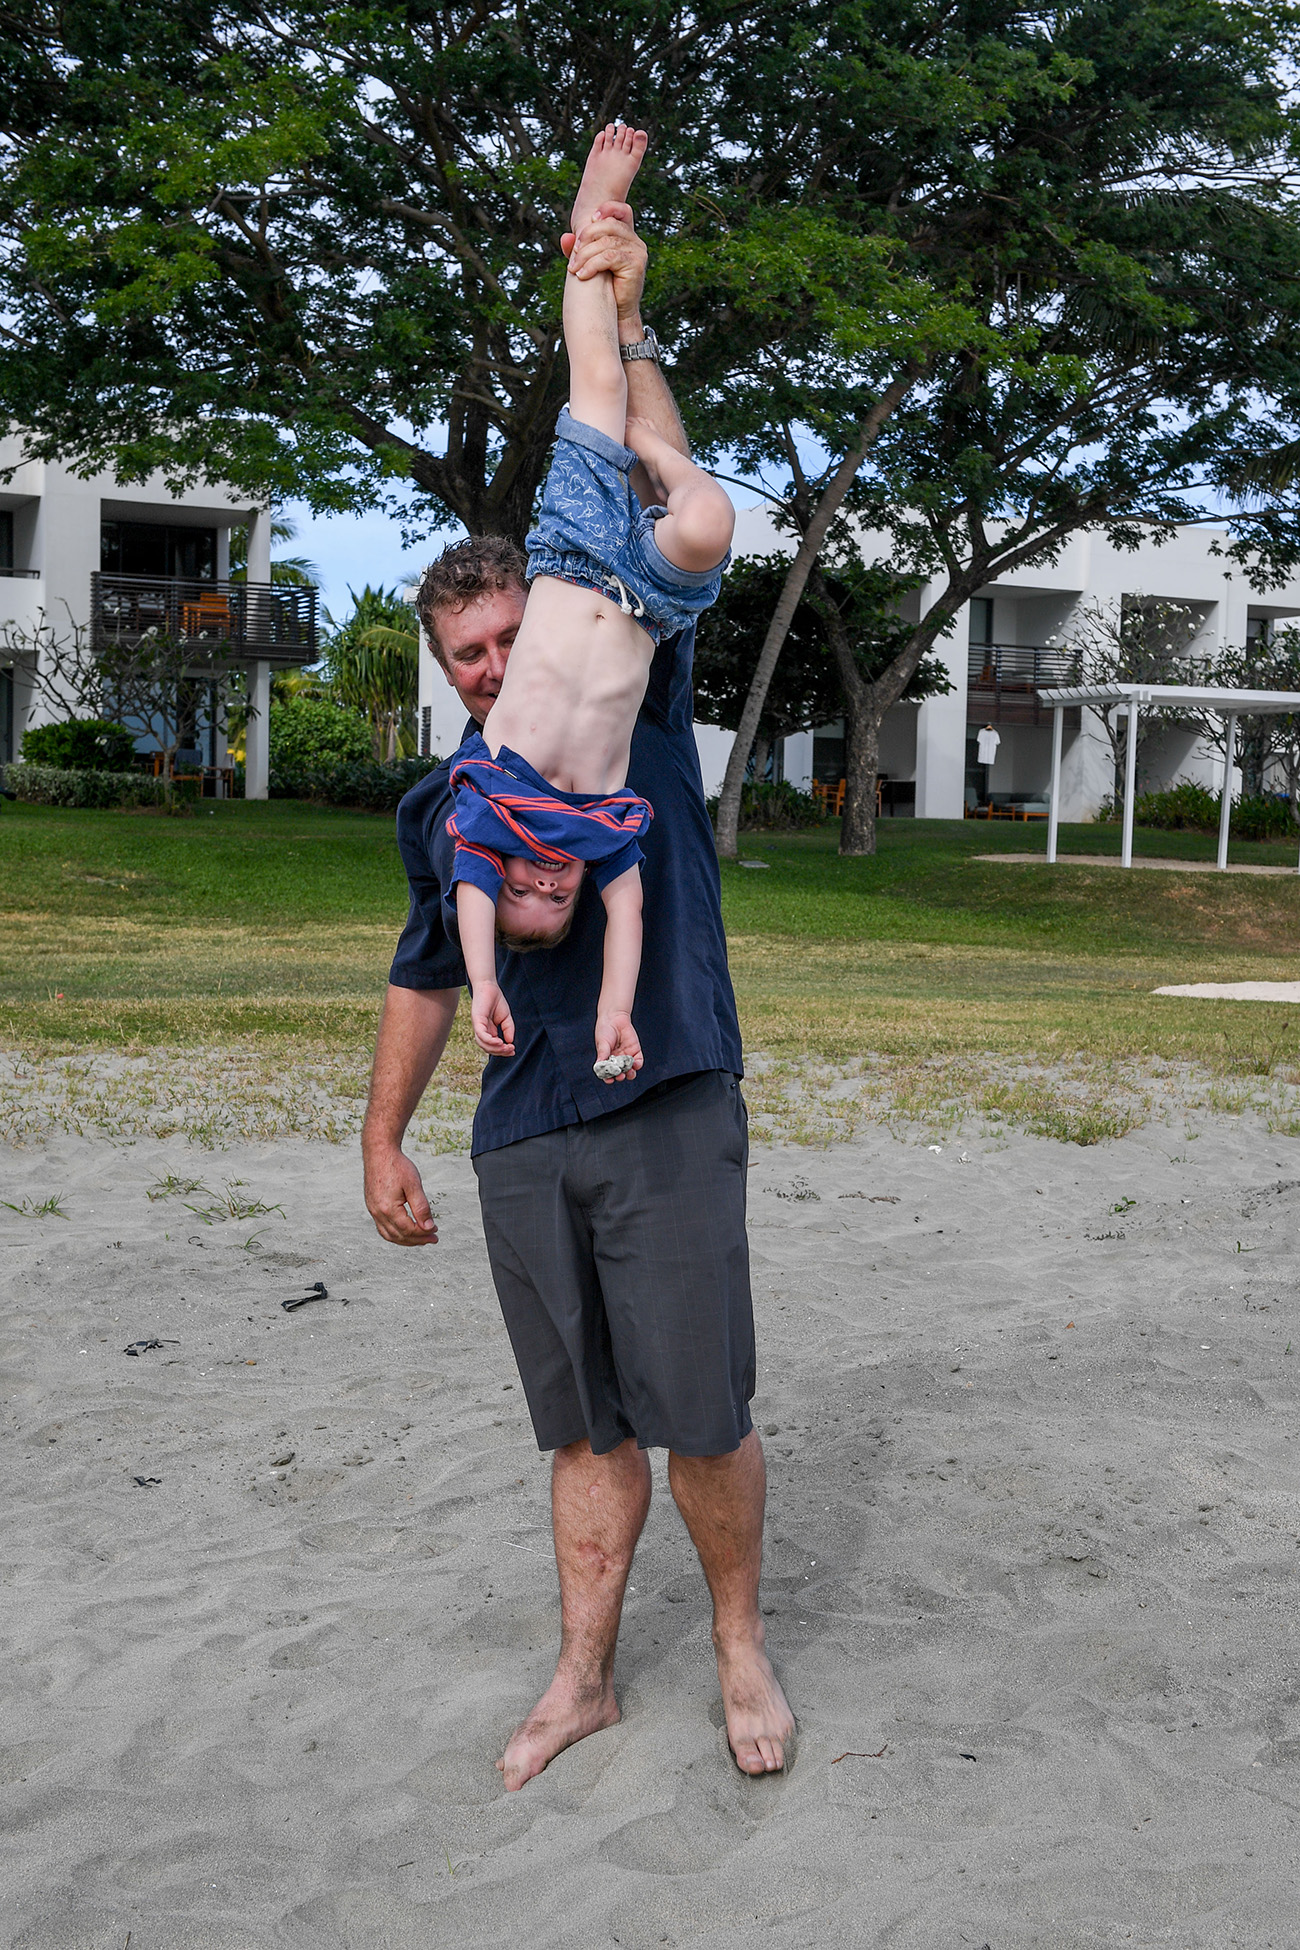 A father carries his son upside down